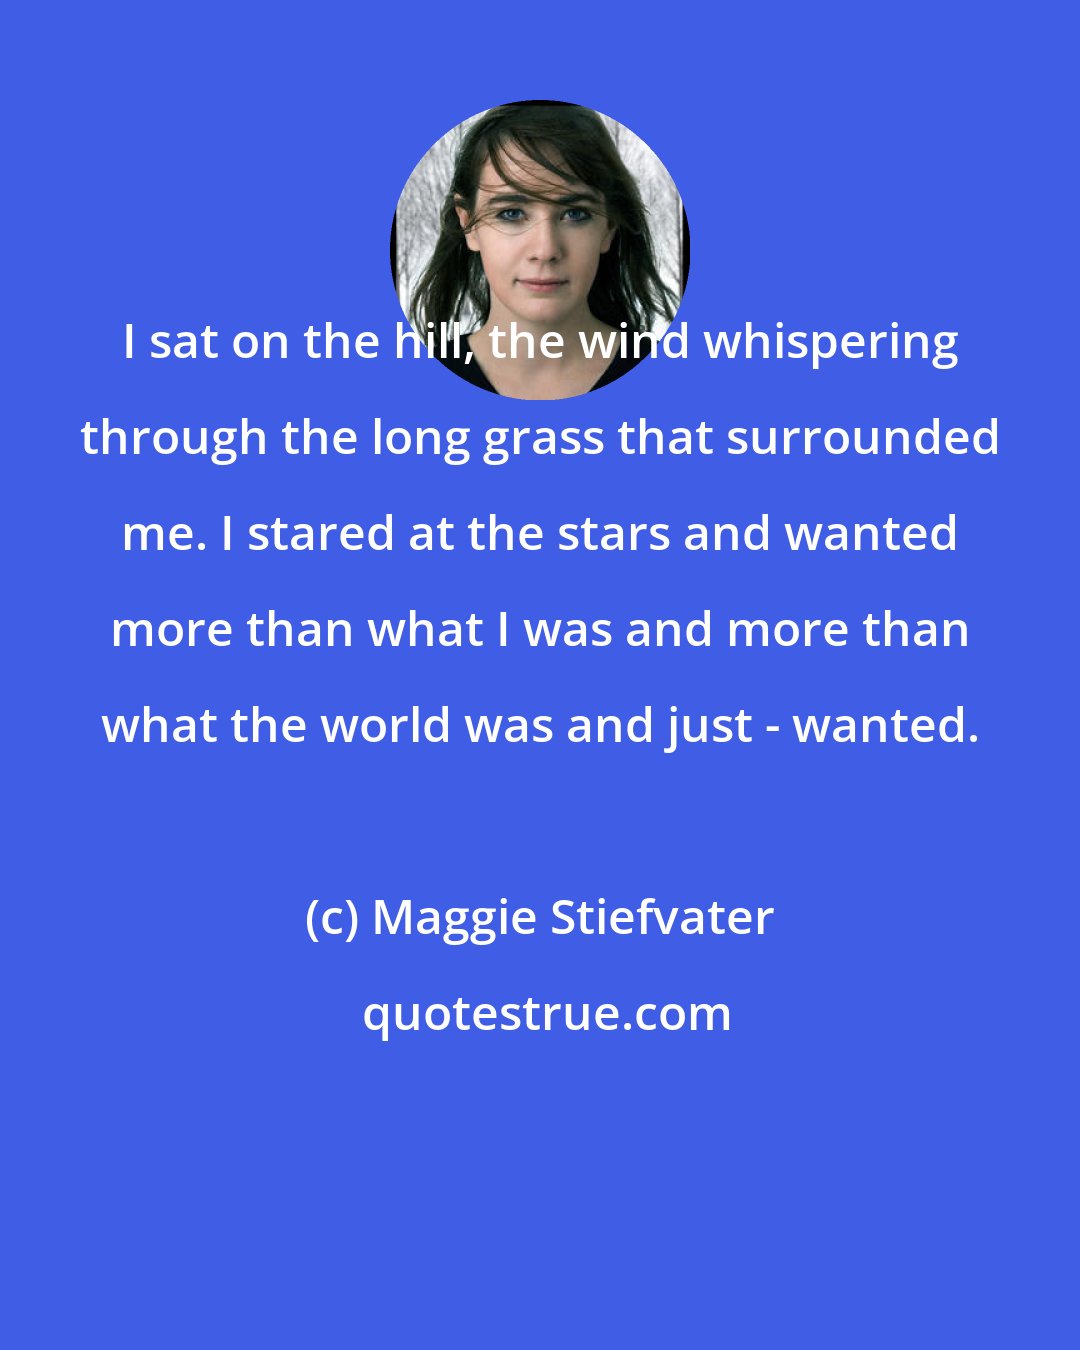 Maggie Stiefvater: I sat on the hill, the wind whispering through the long grass that surrounded me. I stared at the stars and wanted more than what I was and more than what the world was and just - wanted.